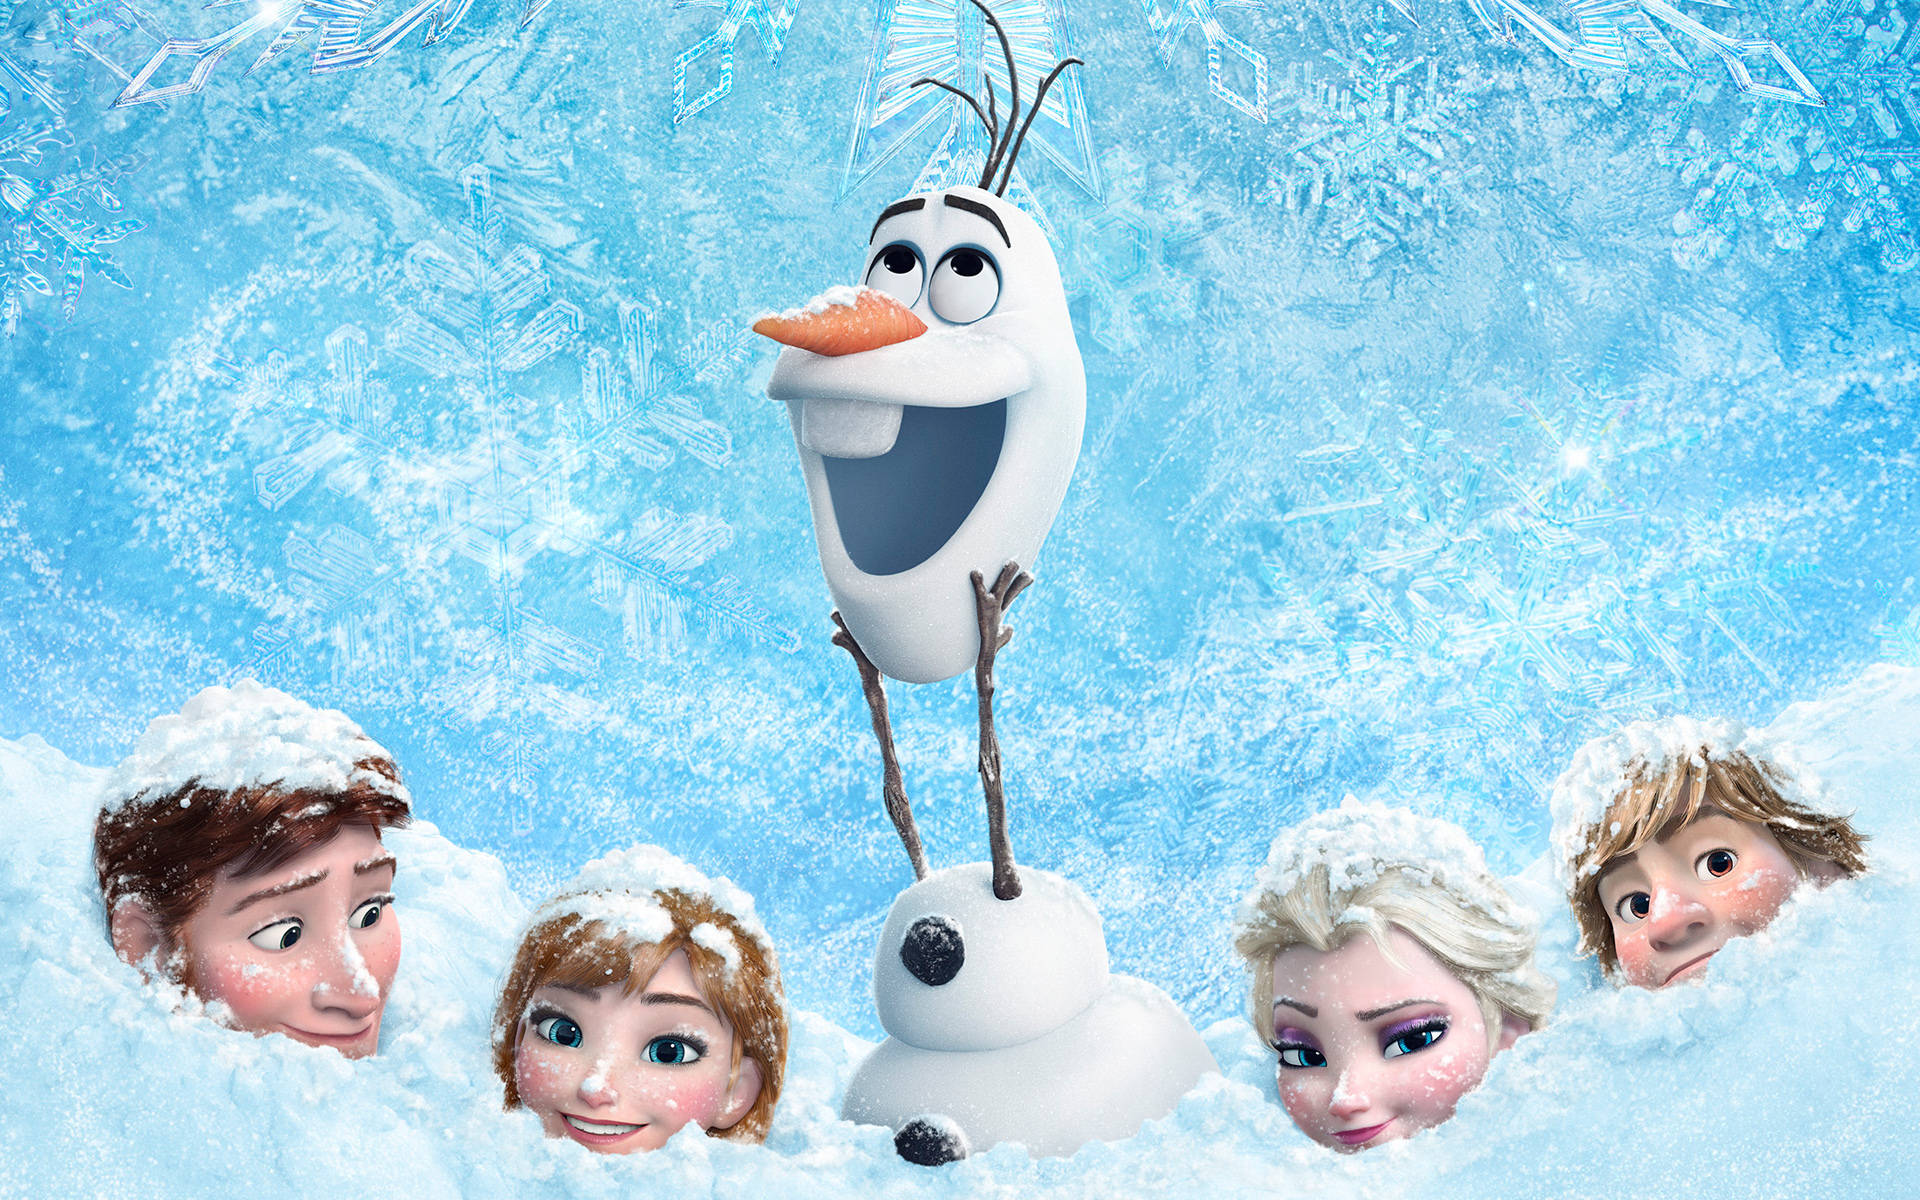 Elsa And Friends Submerged In Snow Wallpaper